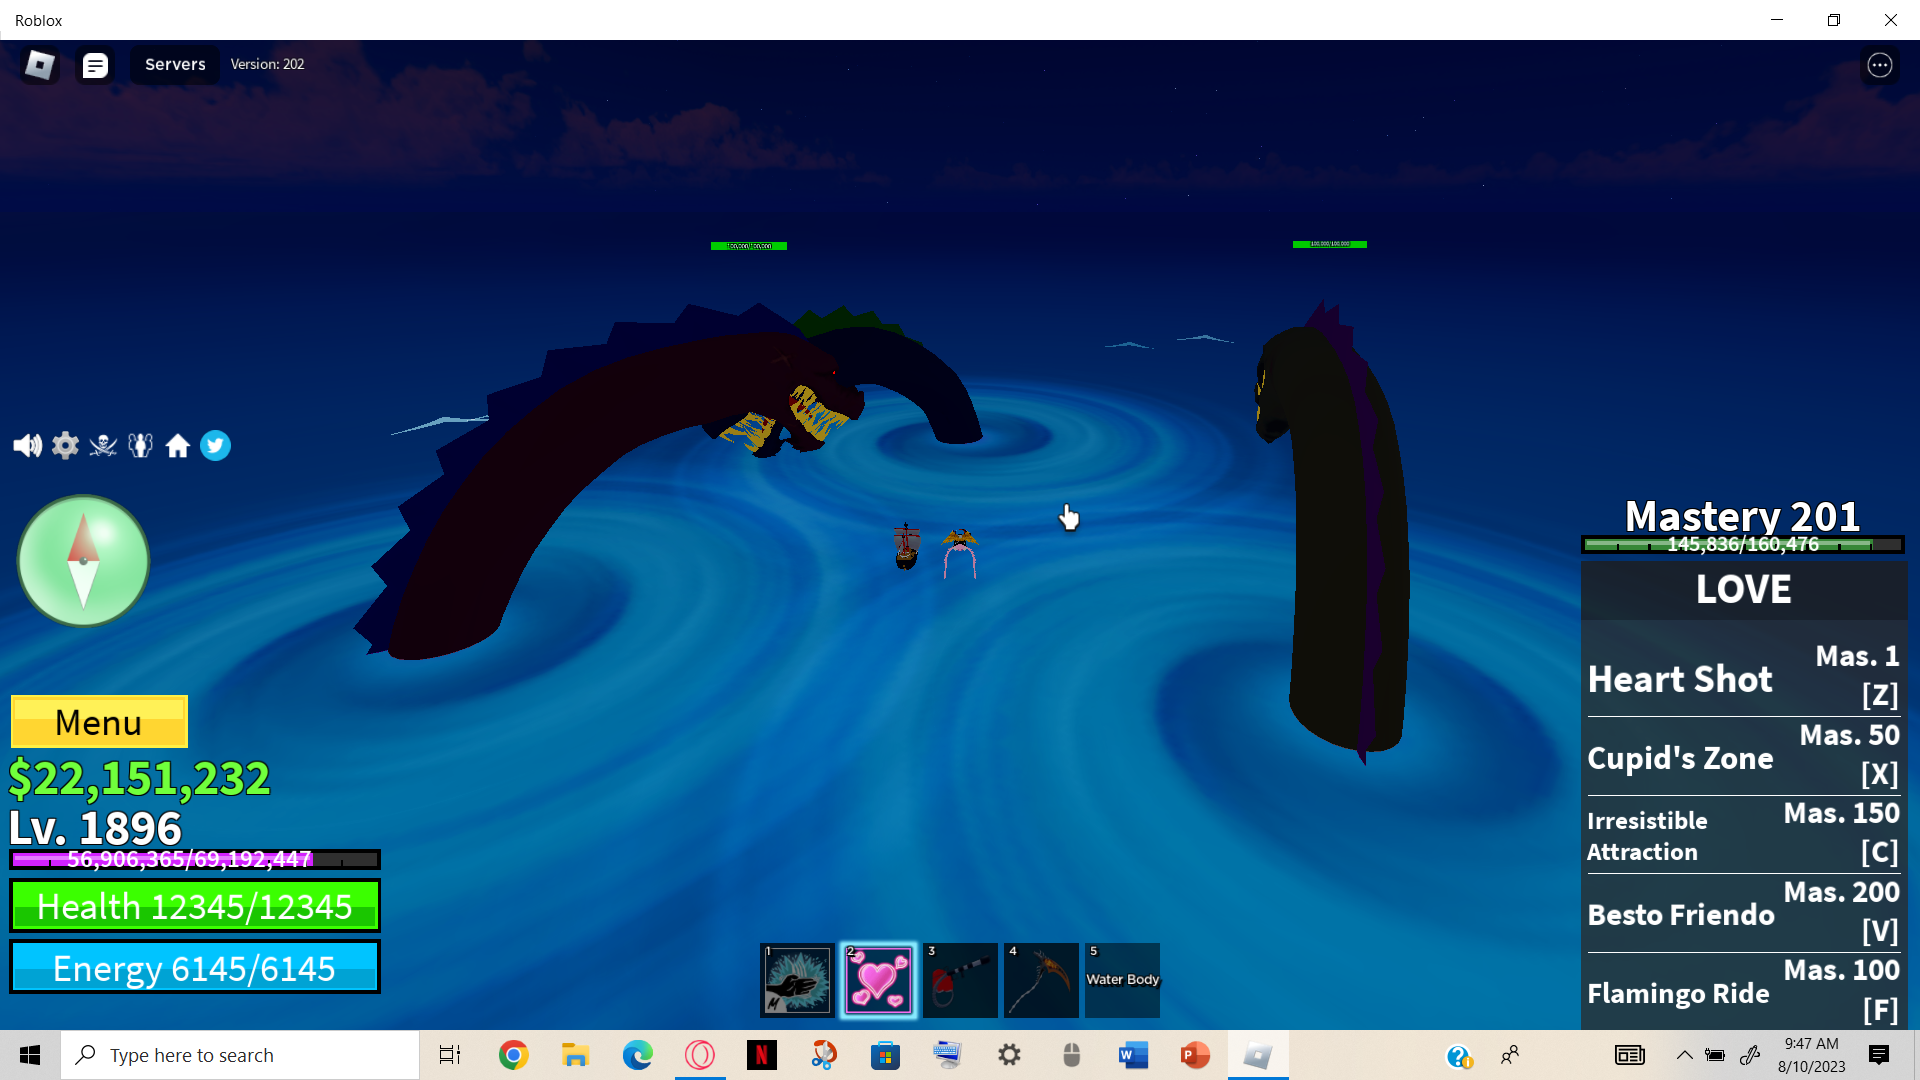 first how are there 3 sea beasts and what is rumbling waters : r/bloxfruits